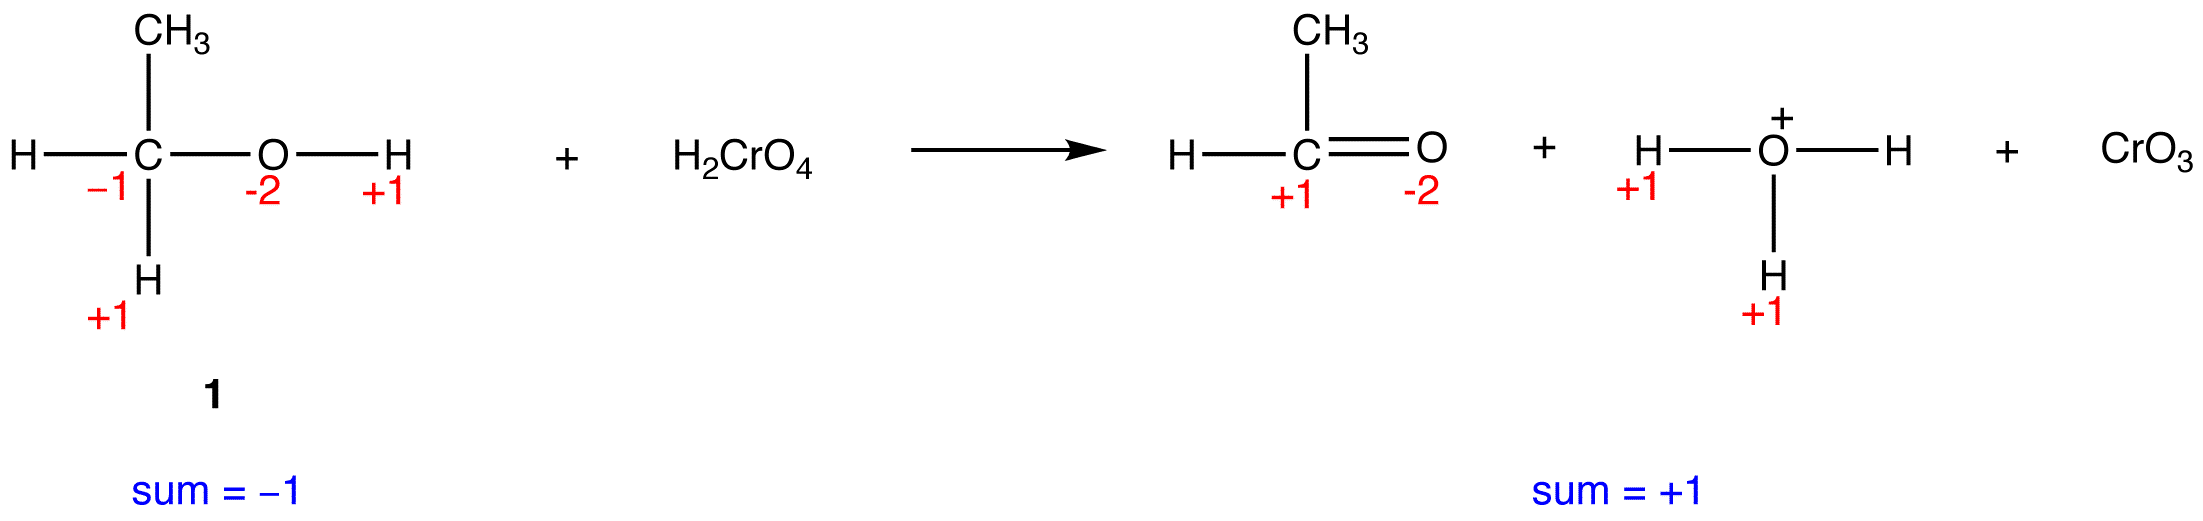 oxidation5.png